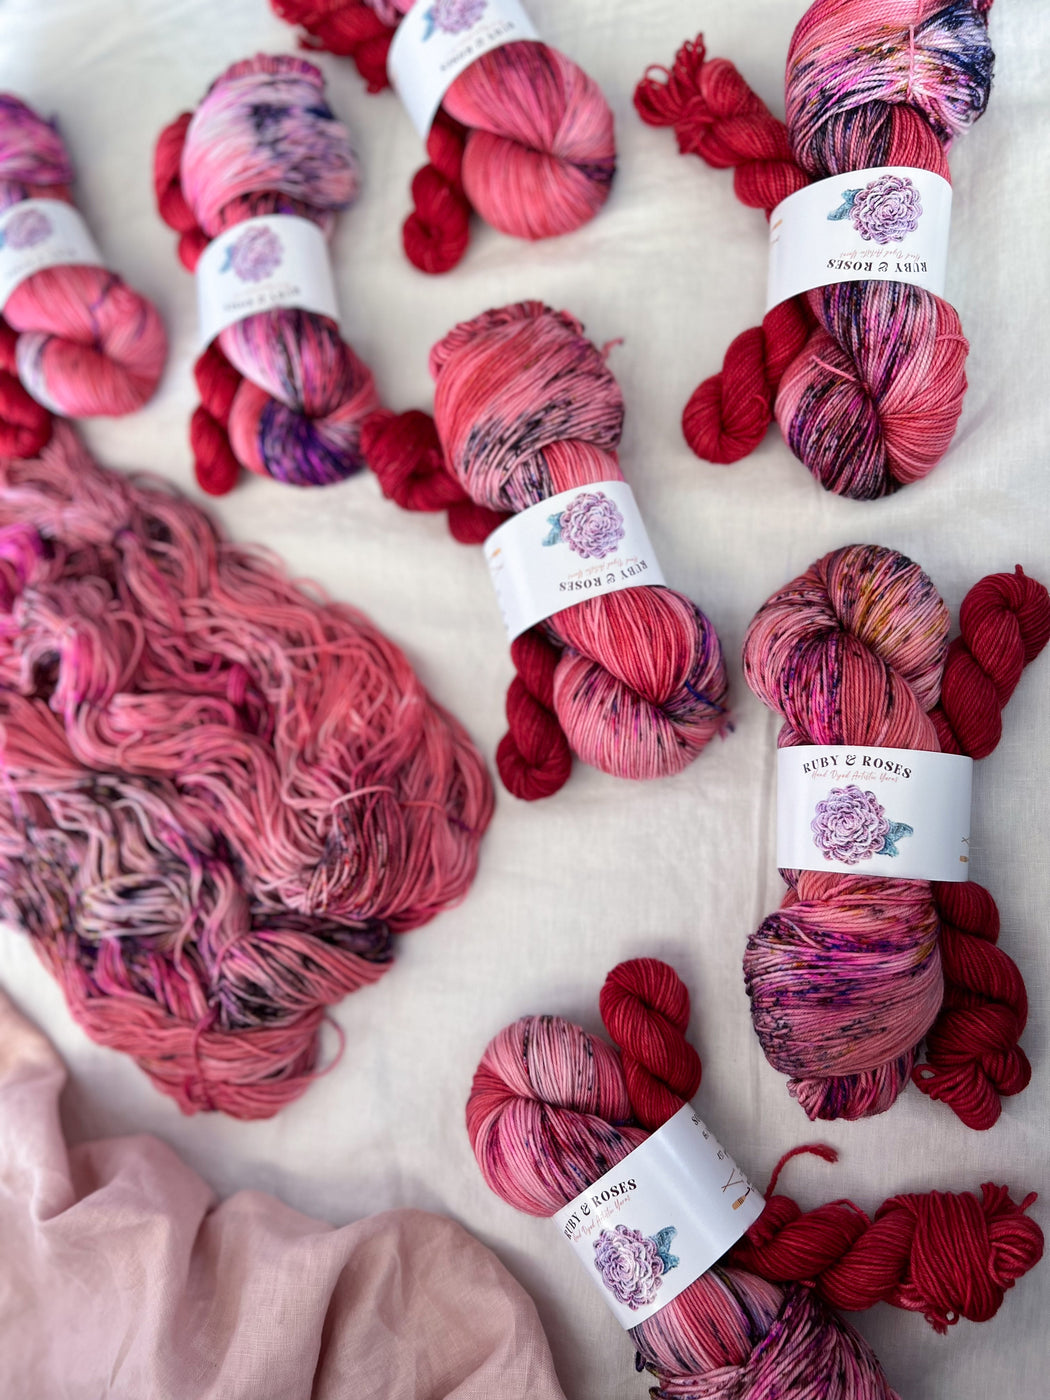 Pombaline /// Sock Set - Ruby and Roses Yarn - Hand Dyed Yarn